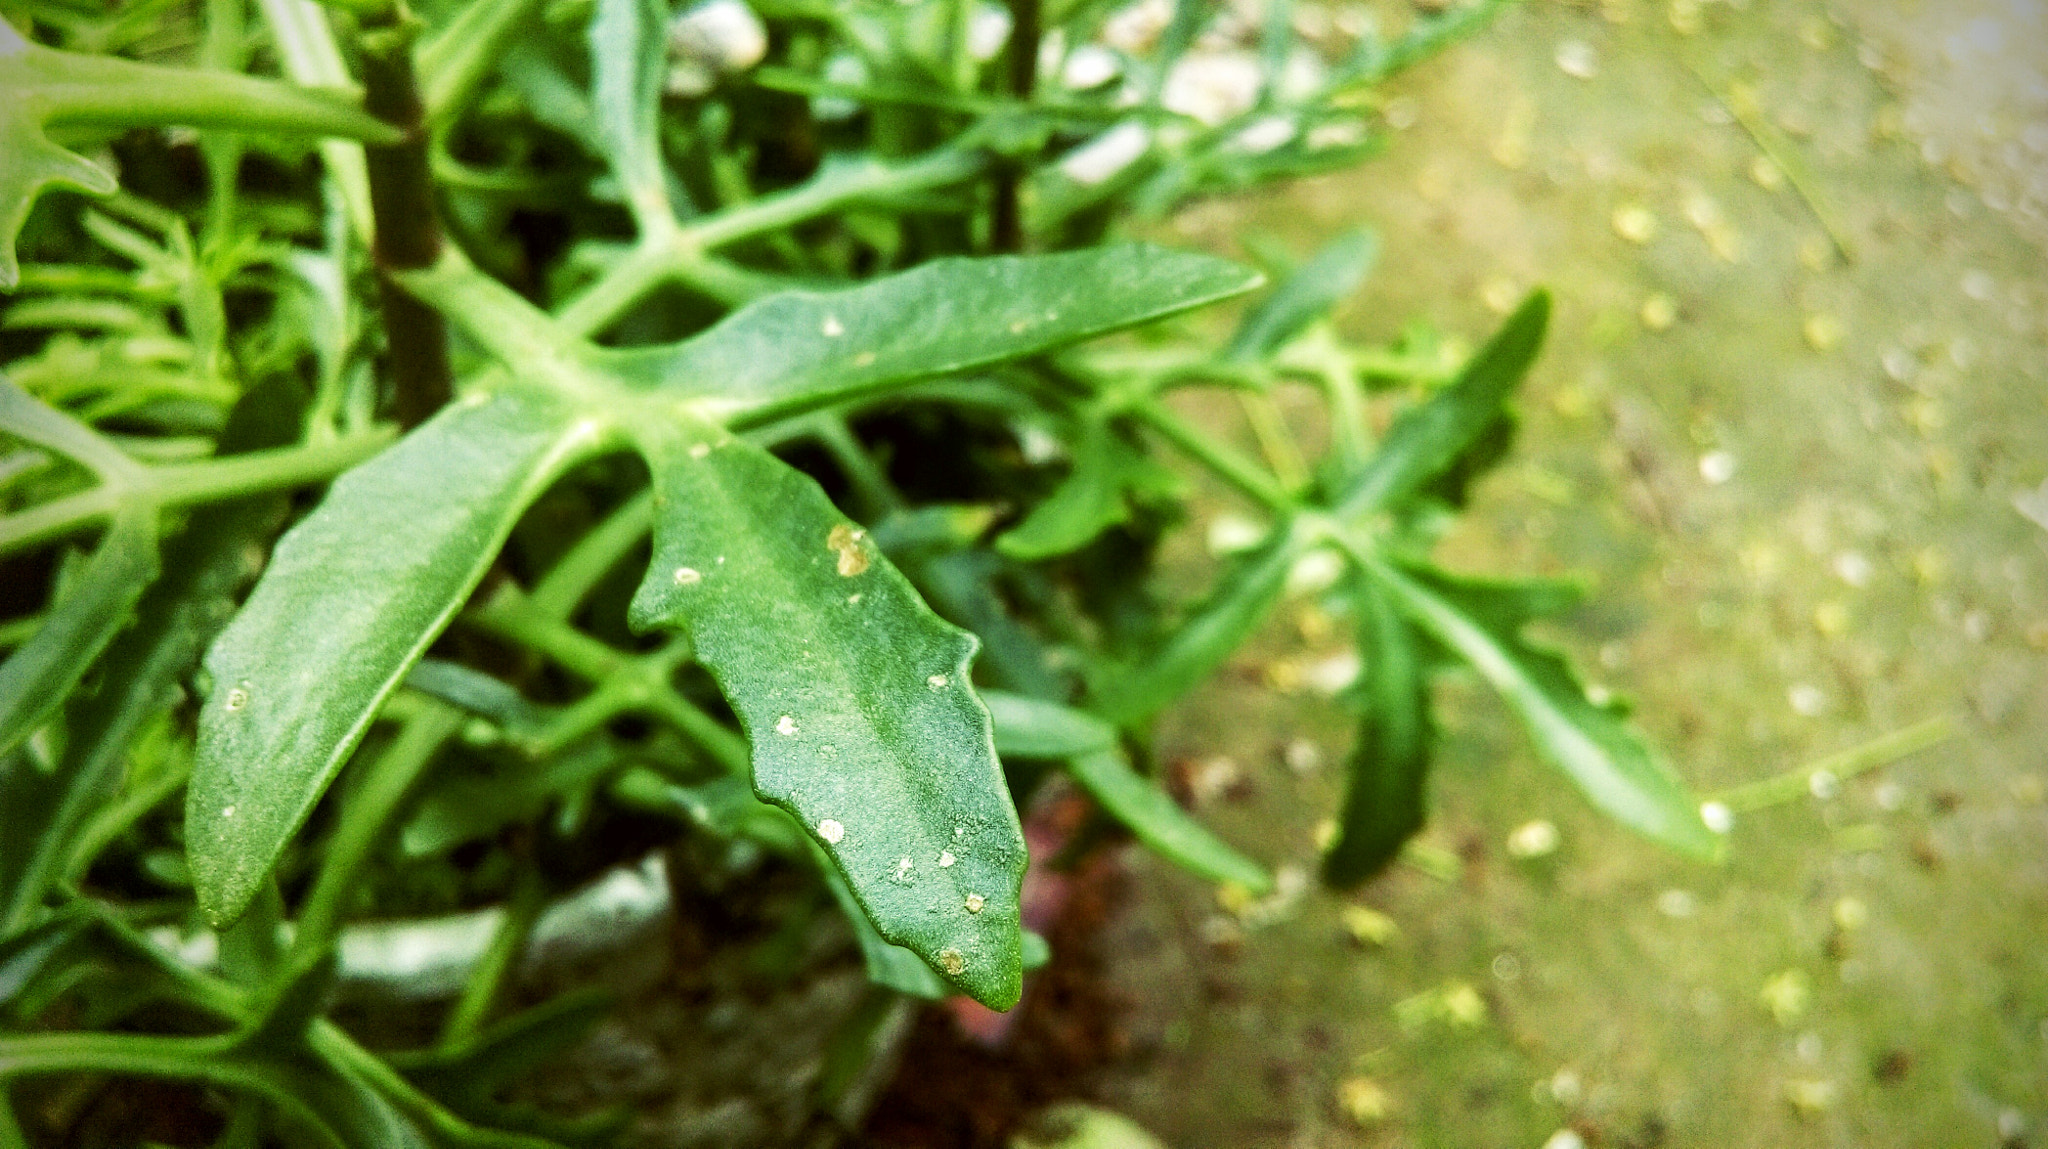 HTC DESIRE 820 DUAL SIM sample photo. Alive is green photography